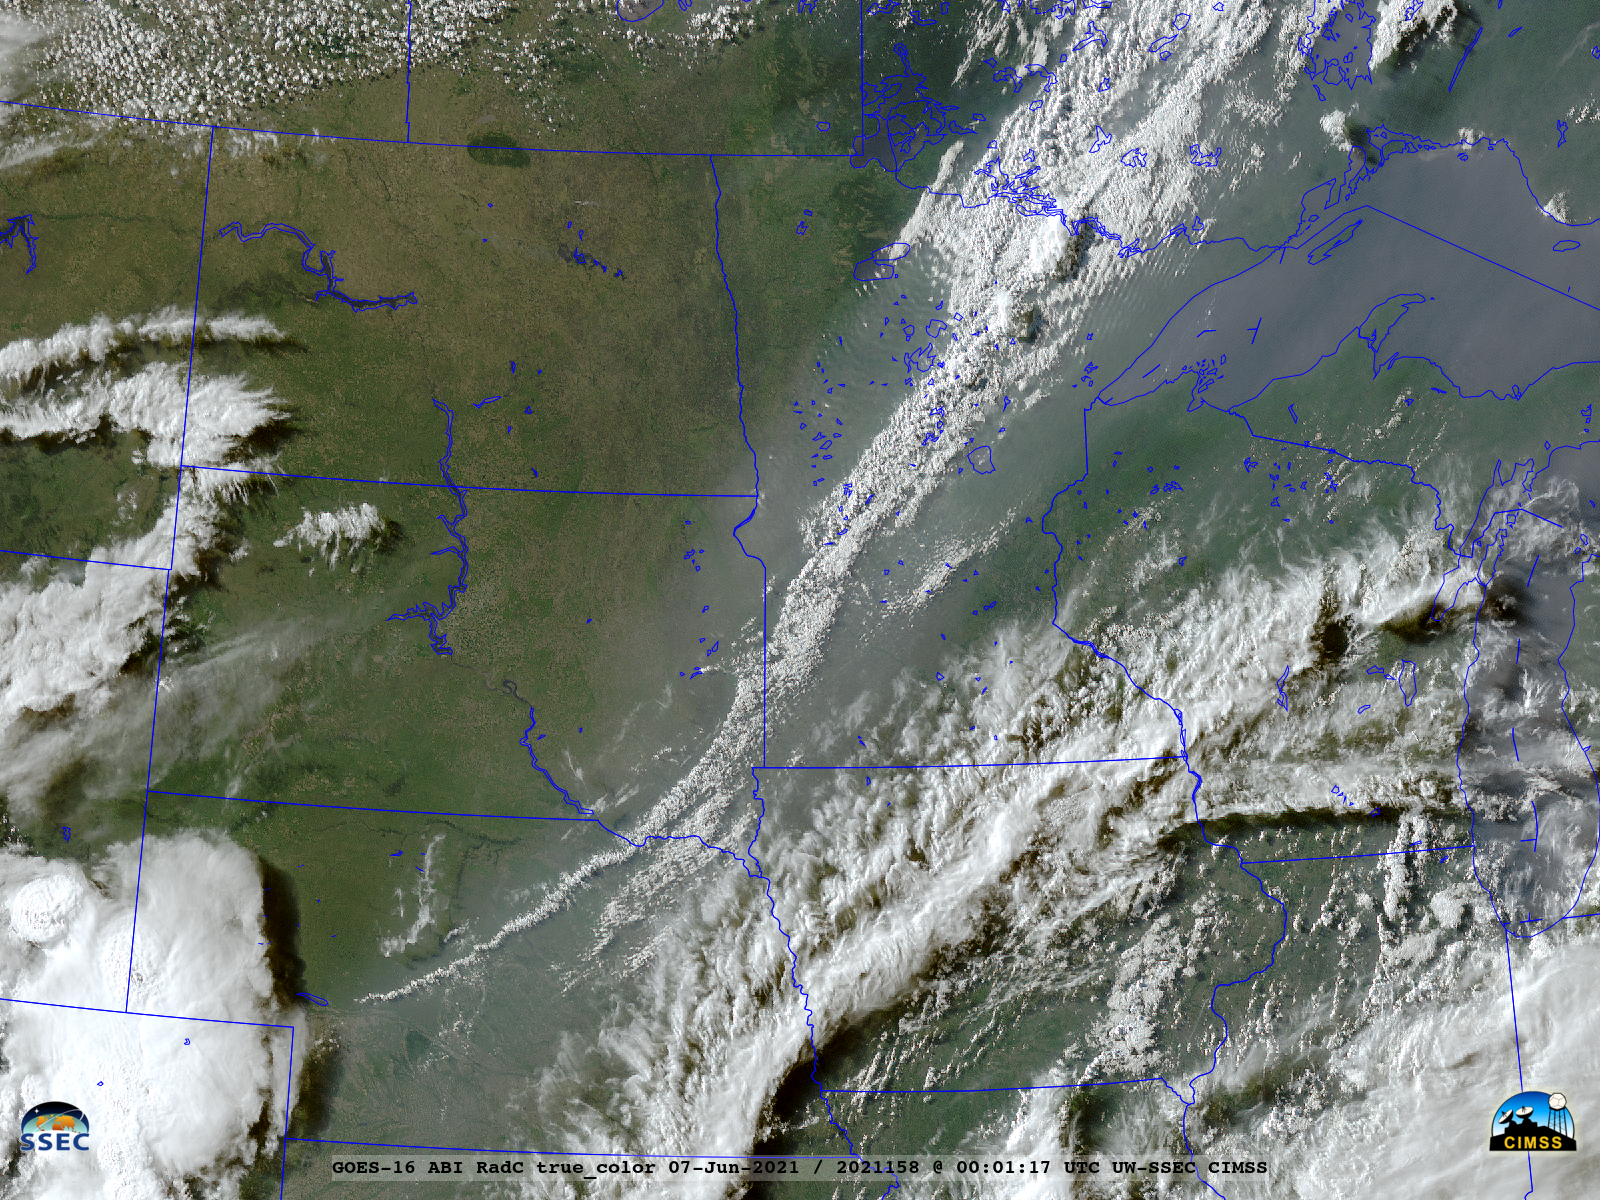 GOES-16 True Color RGB images [click to play animation | <a href="https://cimss.ssec.wisc.edu/satellite-blog/images/2021/06/210606_goes16_trueColorRGB_Upper_Midwest_coldfront_haze_anim.mp4"><strong>MP4</strong></a>]